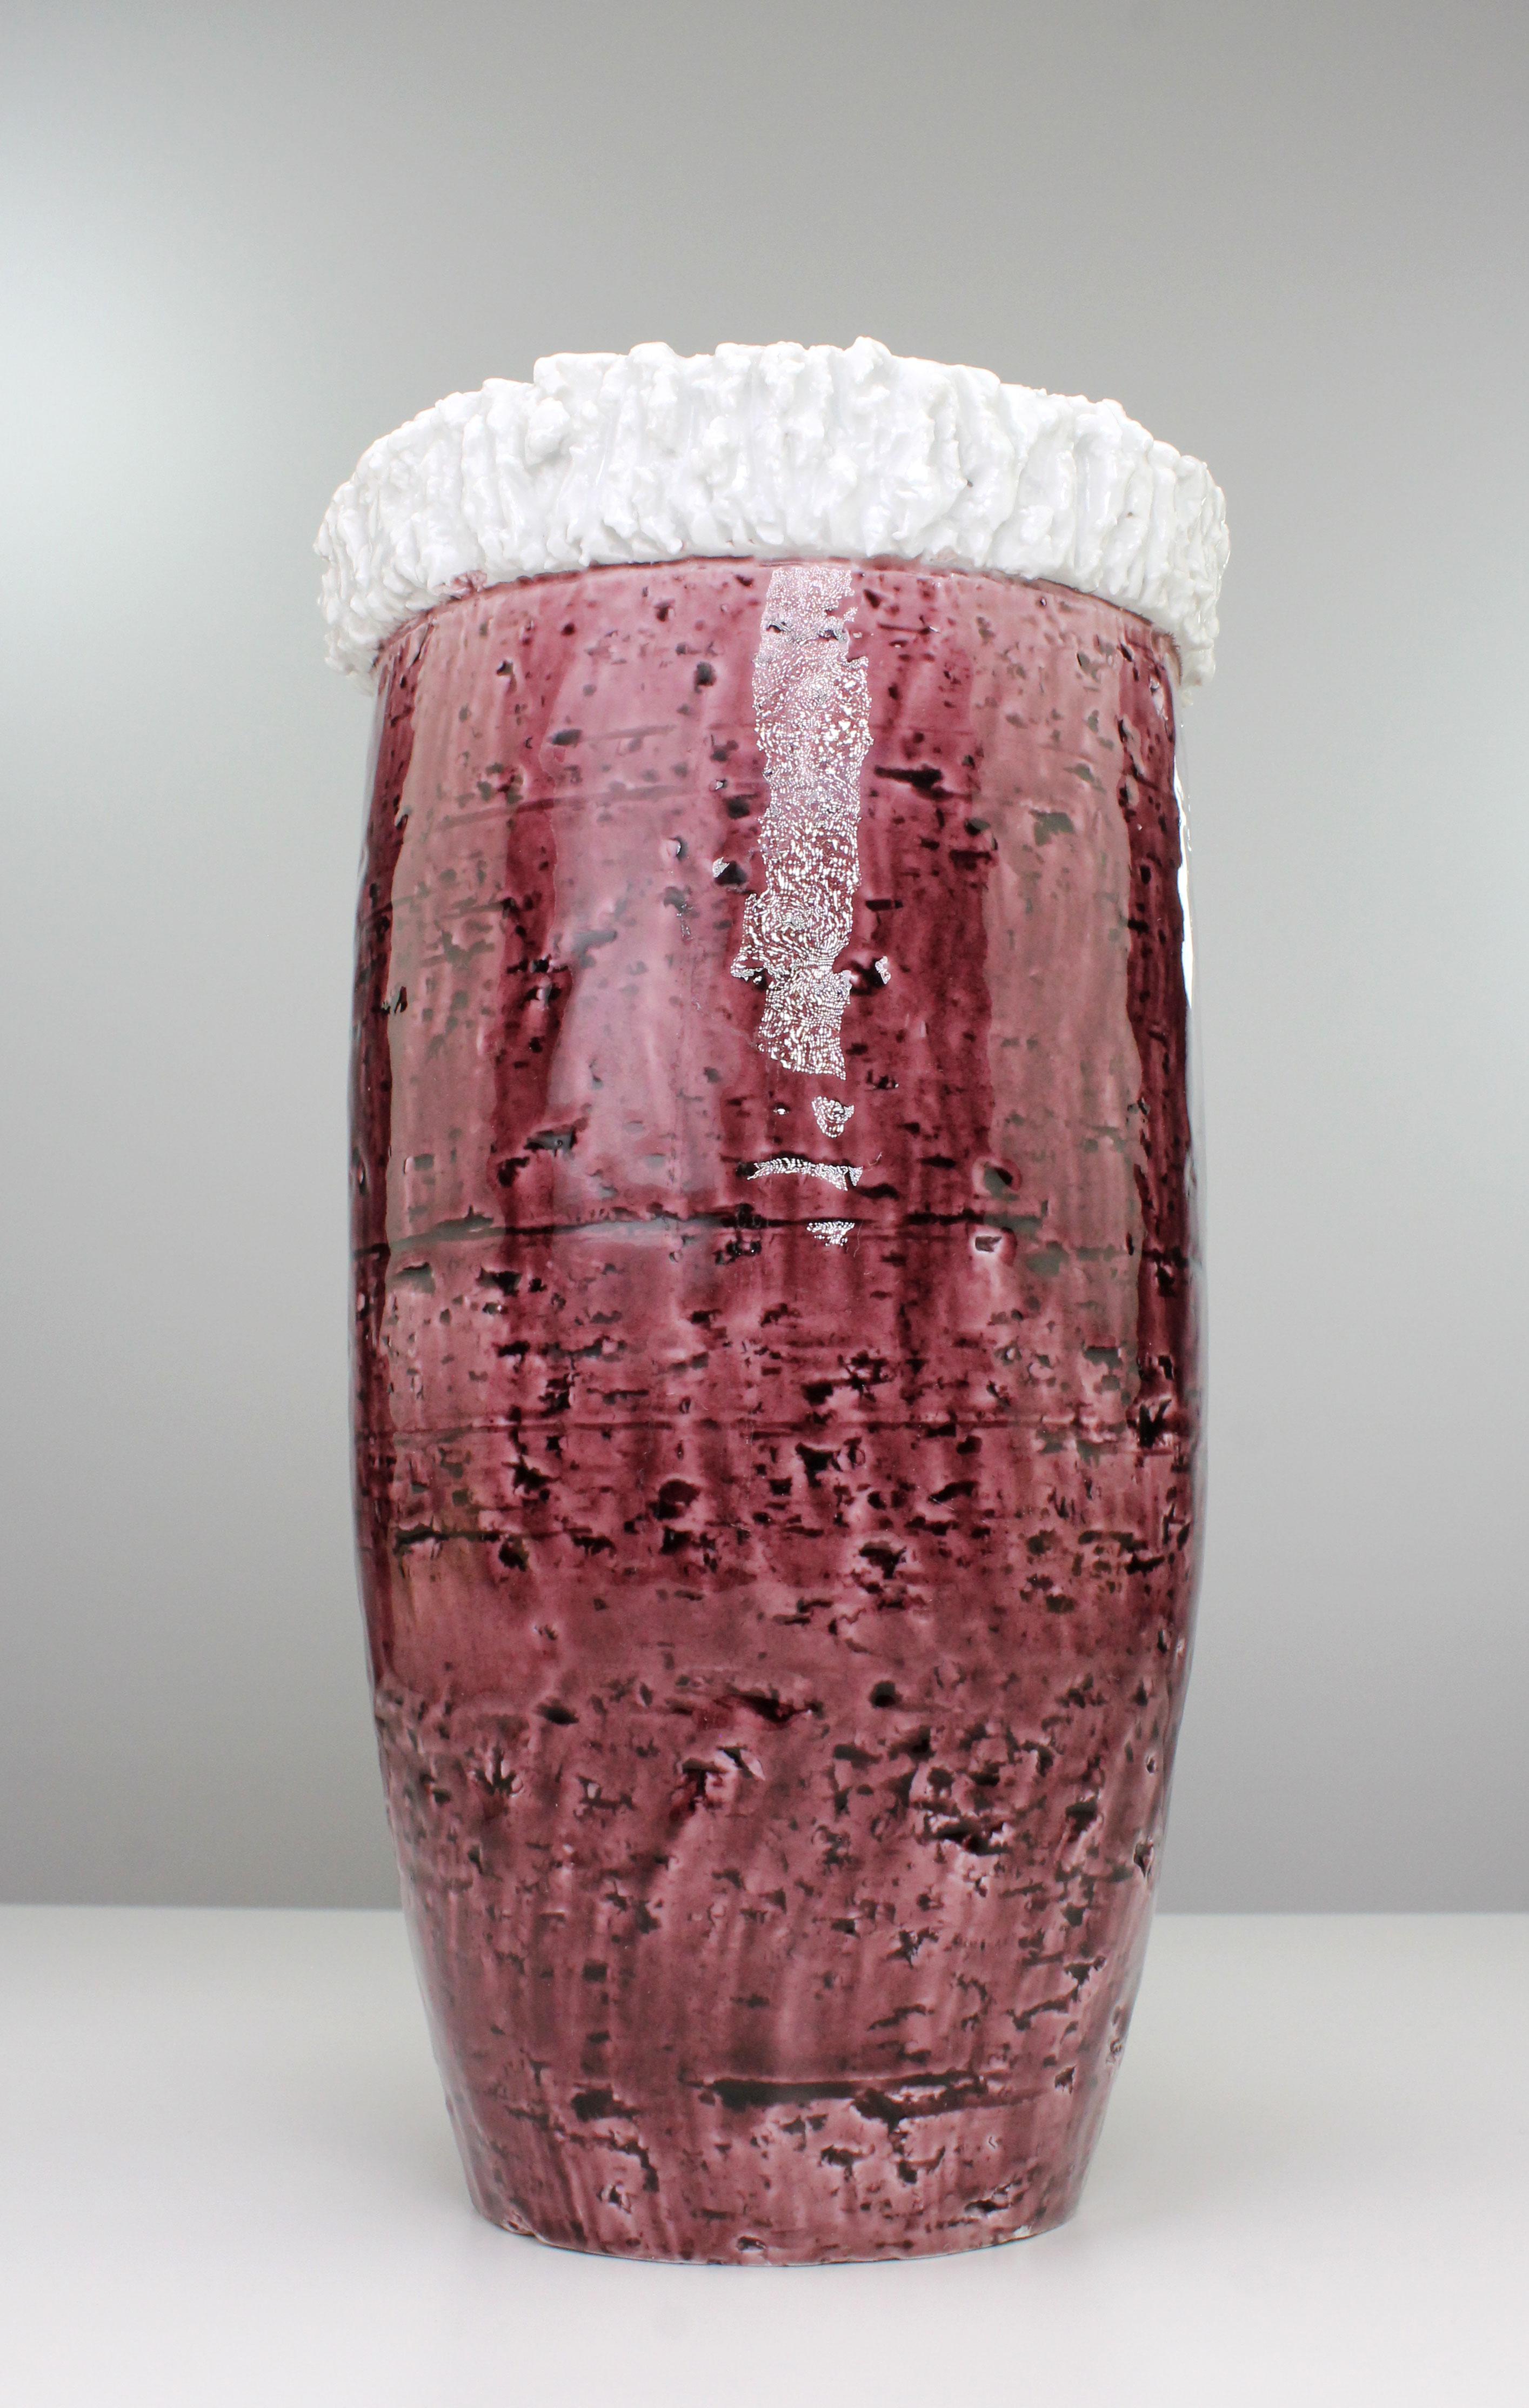 Exceptional Scandinavian Mid-Century Modern handmade chamotte clay and porcelain vase by acclaimed Swedish designer Gunnar Nylund for Rörstrand. Chamotte body with shiny deep raspberry, magenta colored glaze. Crisp white porcelain top and inside.